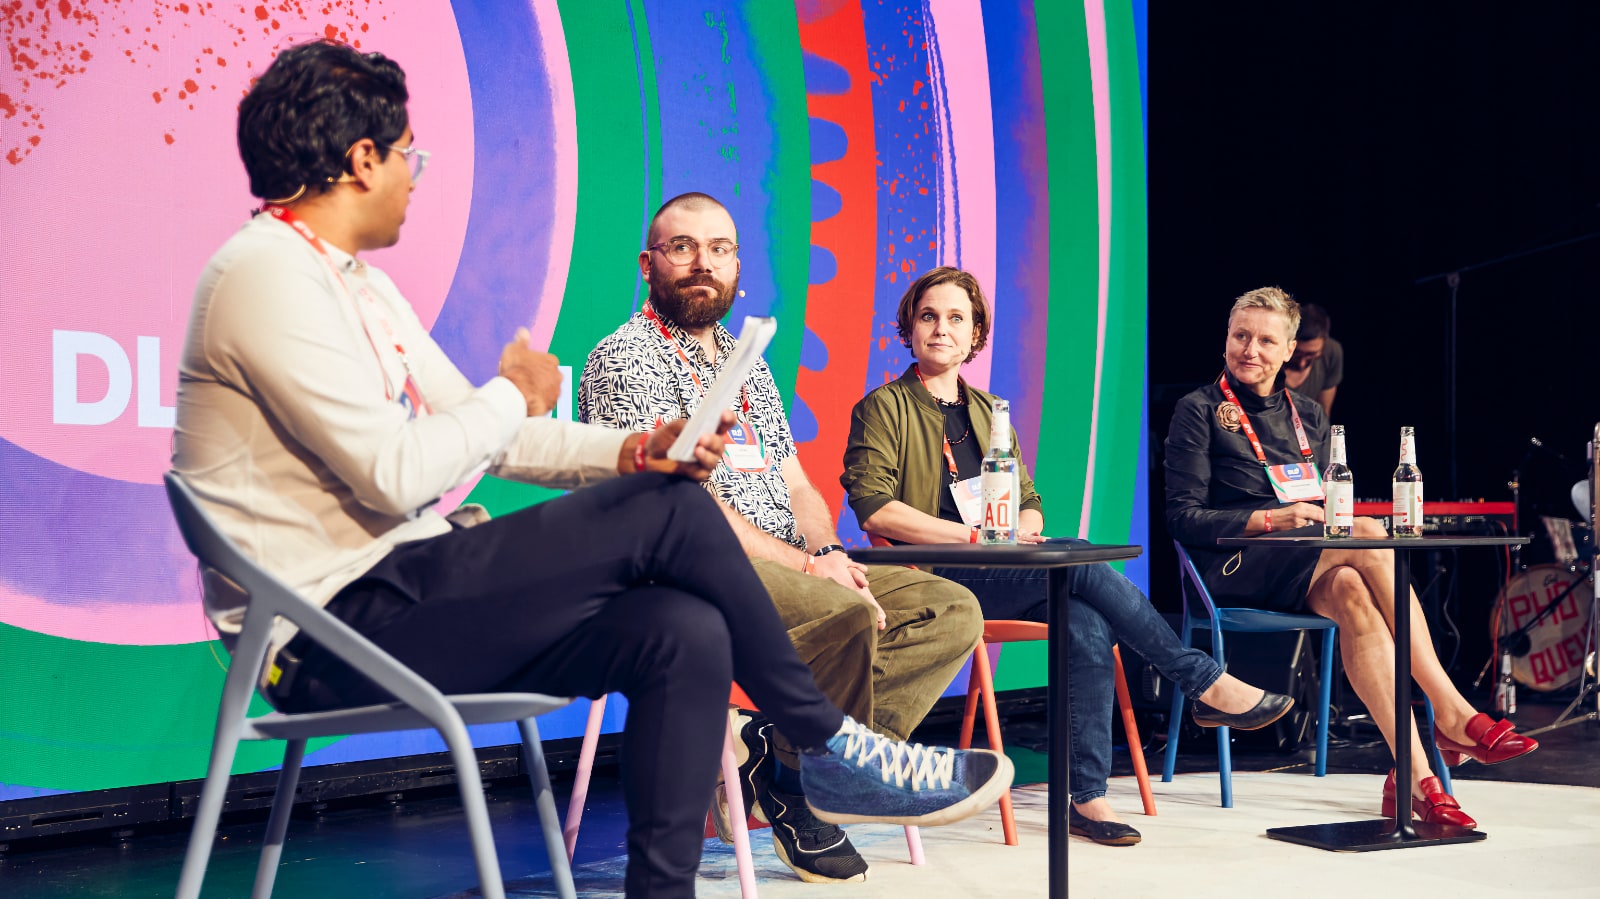 Product design experts discuss the concept of circularity at DLD Circular 2023 in Munich. Left to right: Amit Katwala (WIRED UK), Joe Iles (Ellen MacArthur Foundation), Jessie Storey (Steelcase) and Daniela Bohlinger (BMW Group